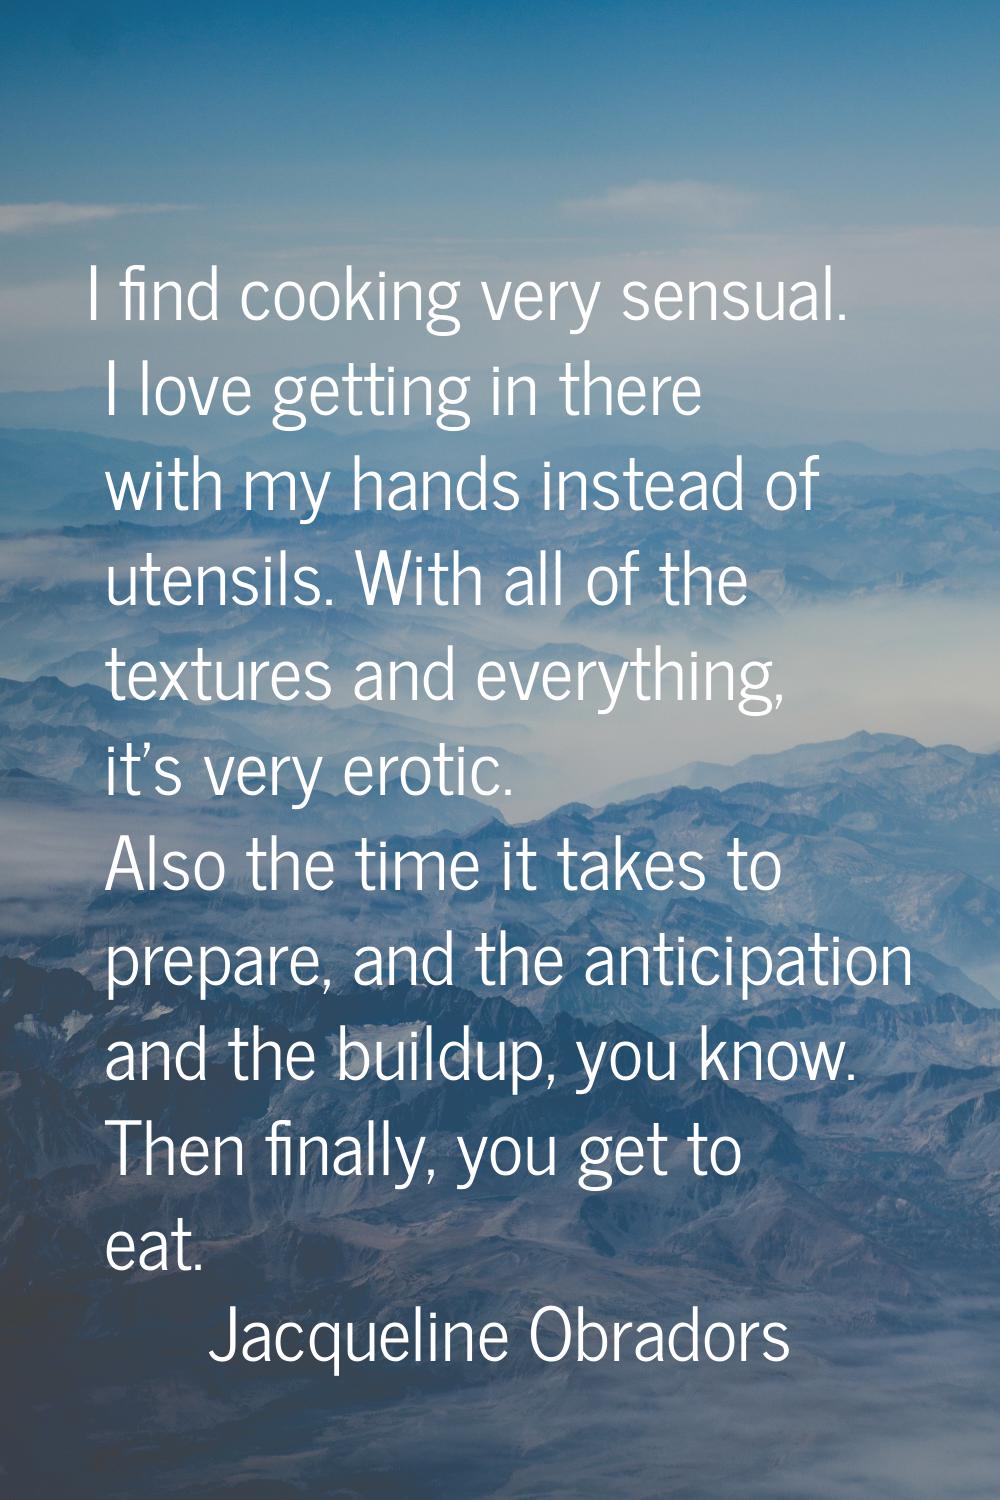 I find cooking very sensual. I love getting in there with my hands instead of utensils. With all of